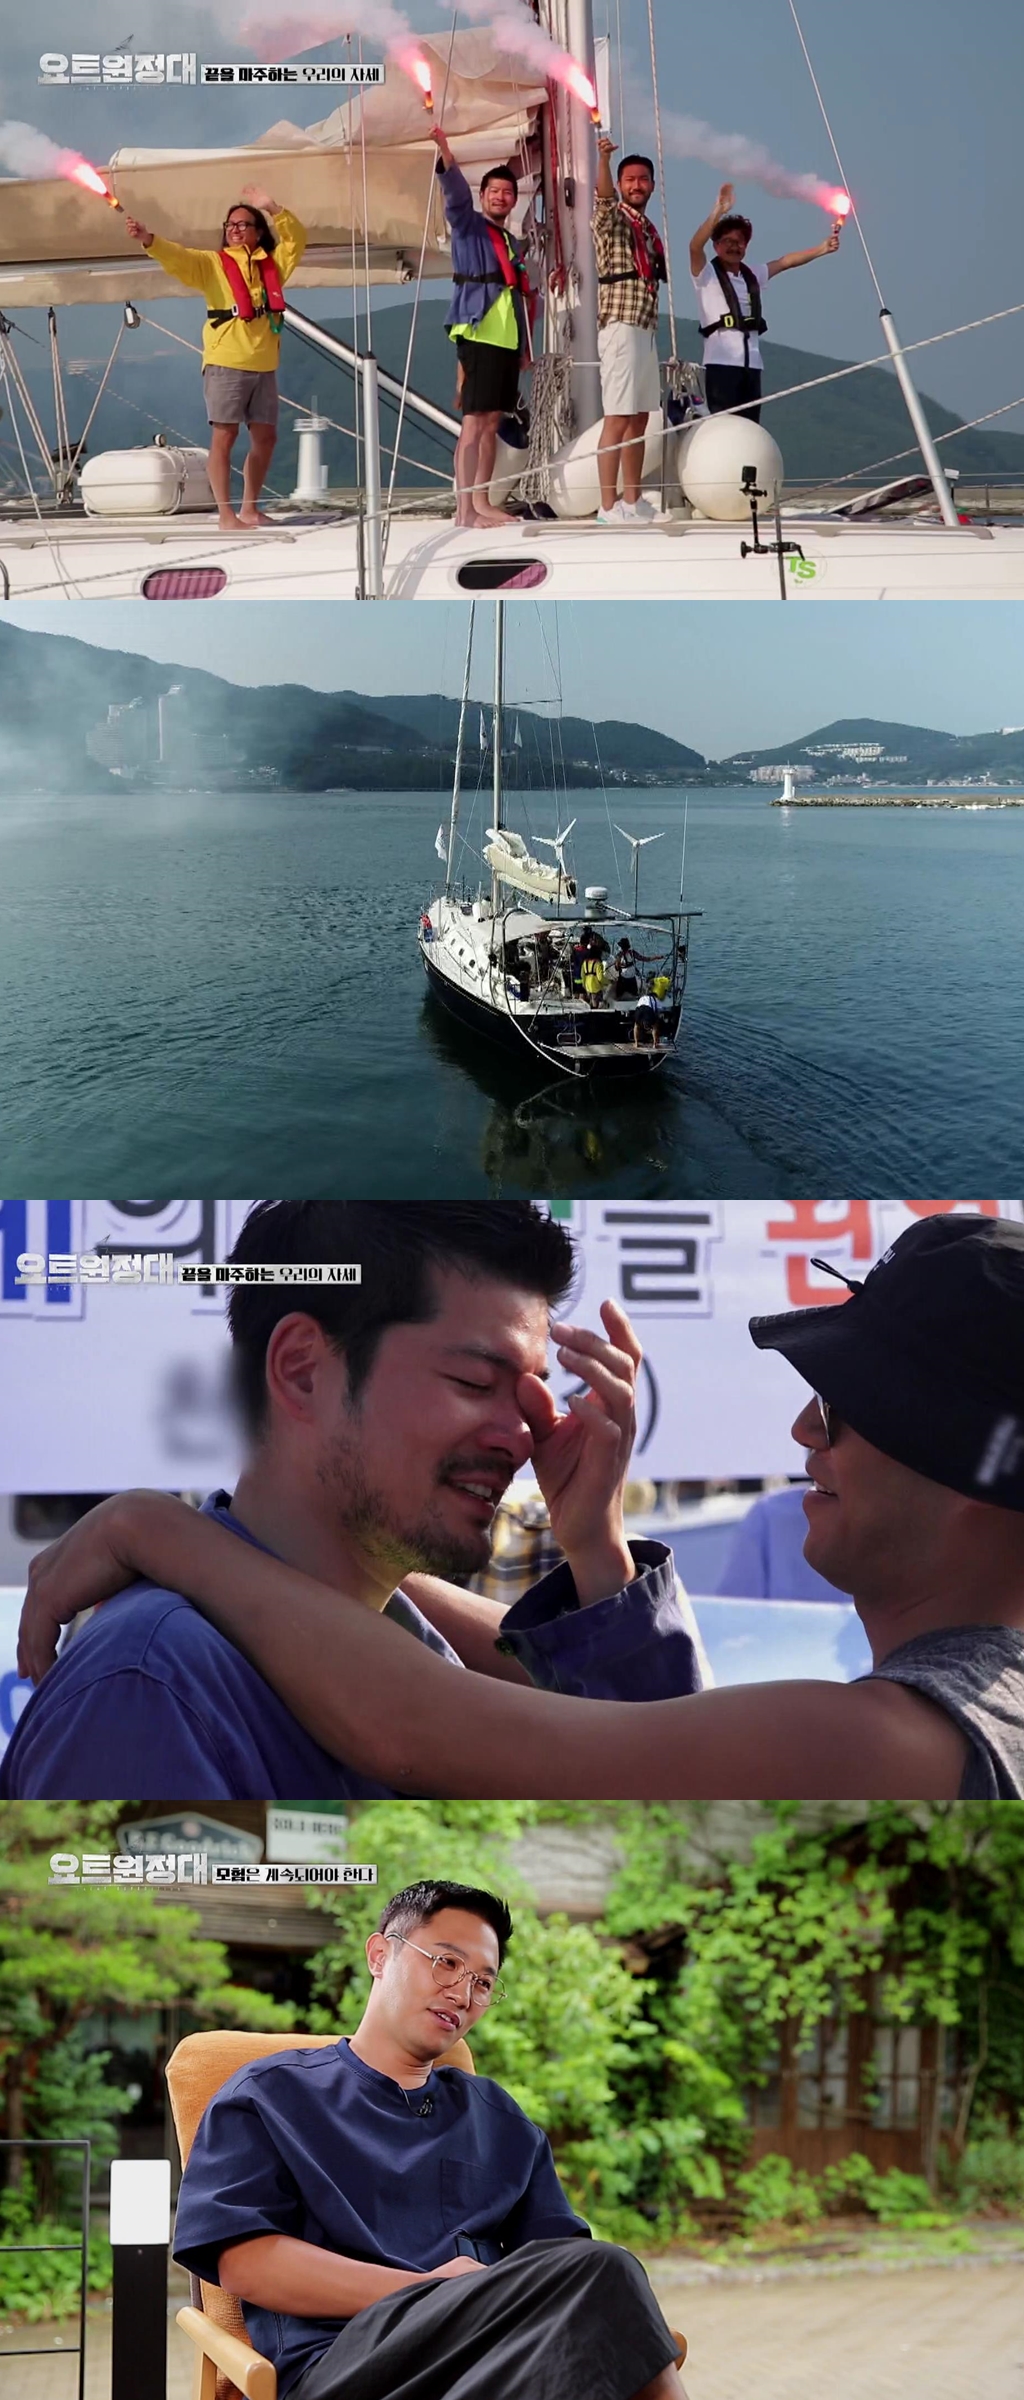 The story of Chang Kiha, a yacht expedition, burst into tears as he finished his long journey will be revealed.In the 10th MBC Everlon Yot Expedition broadcast on October 19, Jin Goo - Choi Siwon - Chang Kiha - Song Ho Jun is drawn to the end of the voyage D - day.The Yacht Expedition, which was aimed at the Pacific South Cross, suffered from the fear of rough waves and the greatness of Mother Nature in its Summertime.The last appearance of the yacht expedition, which concludes this 17-day Summertime, is expected to convey deep impression and resonance.On this day, Yot Expedition will perform the last Summertime to return to Geoje Island, where it departed.In order to appease the regret, the crew will prepare for the entrance from yacht cleaning to flowering.Captain Kim Seung-jin makes a gift with a lot of affection to his crew, and they leave memories of the days on the yacht.In the meantime, the first footing of the yacht expedition on the land is revealed, attracting attention. The welcome crew feel the rising Feeling.Especially Chang Kiha said that he broke out unexpected tears, raising questions about what the story would be.Chang Kiha said, I thought I wanted to go and rest quickly until I saw Geoje Island, but suddenly I started to get stuck.What Feeling did Chang Kiha feel when he finished the voyage?Song Ho-jun, who is said to have been unable to speak to Feeling after Chang Kiha, is also interested in what the last day of the team was like.On this day, it will also include the behind-the-scenes stories of Jin Goo, Choi Siwon, Chang Kiha and Song Ho-joon, who convey their feelings of ending the voyage.The crews were open to the Feelings and Enlightenment they felt while sailing, especially Jin Goo, who said that the voyage had become a turning point of life.What did they learn from the voyage? Attention is focused on the last story of the Yacht Expedition, which will give a sense of emotion.Meanwhile, MBC Everlons 10th Yacht Expedition will be broadcast on Monday, October 19 at 8:30 pm.iMBC  Photos Offering MBC Everlon